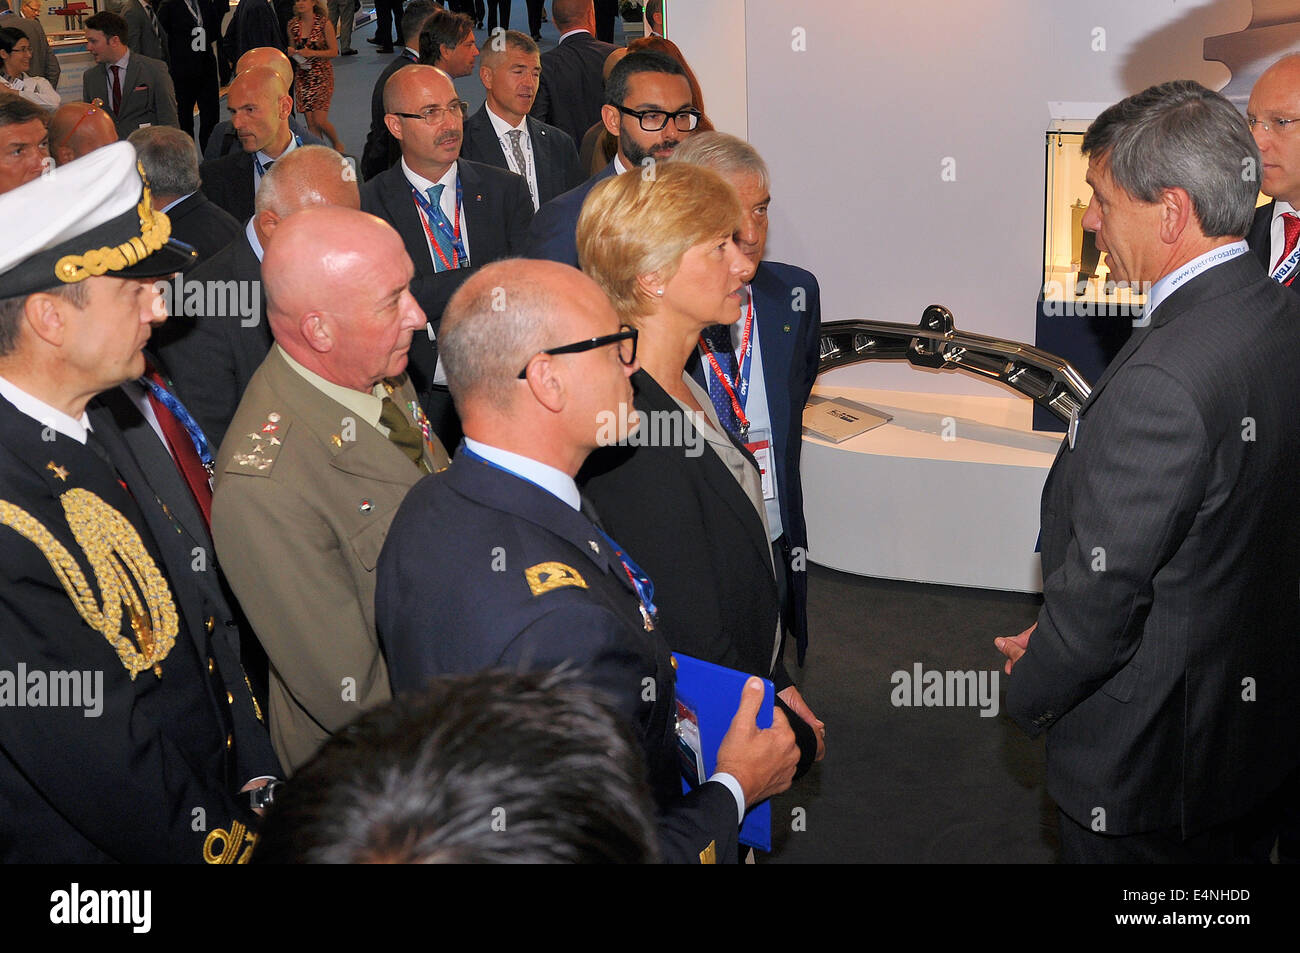 Government and military representatives visit a trade stand at the Farnborough International Airshow. Business arms fair meeting. Military attache Stock Photo